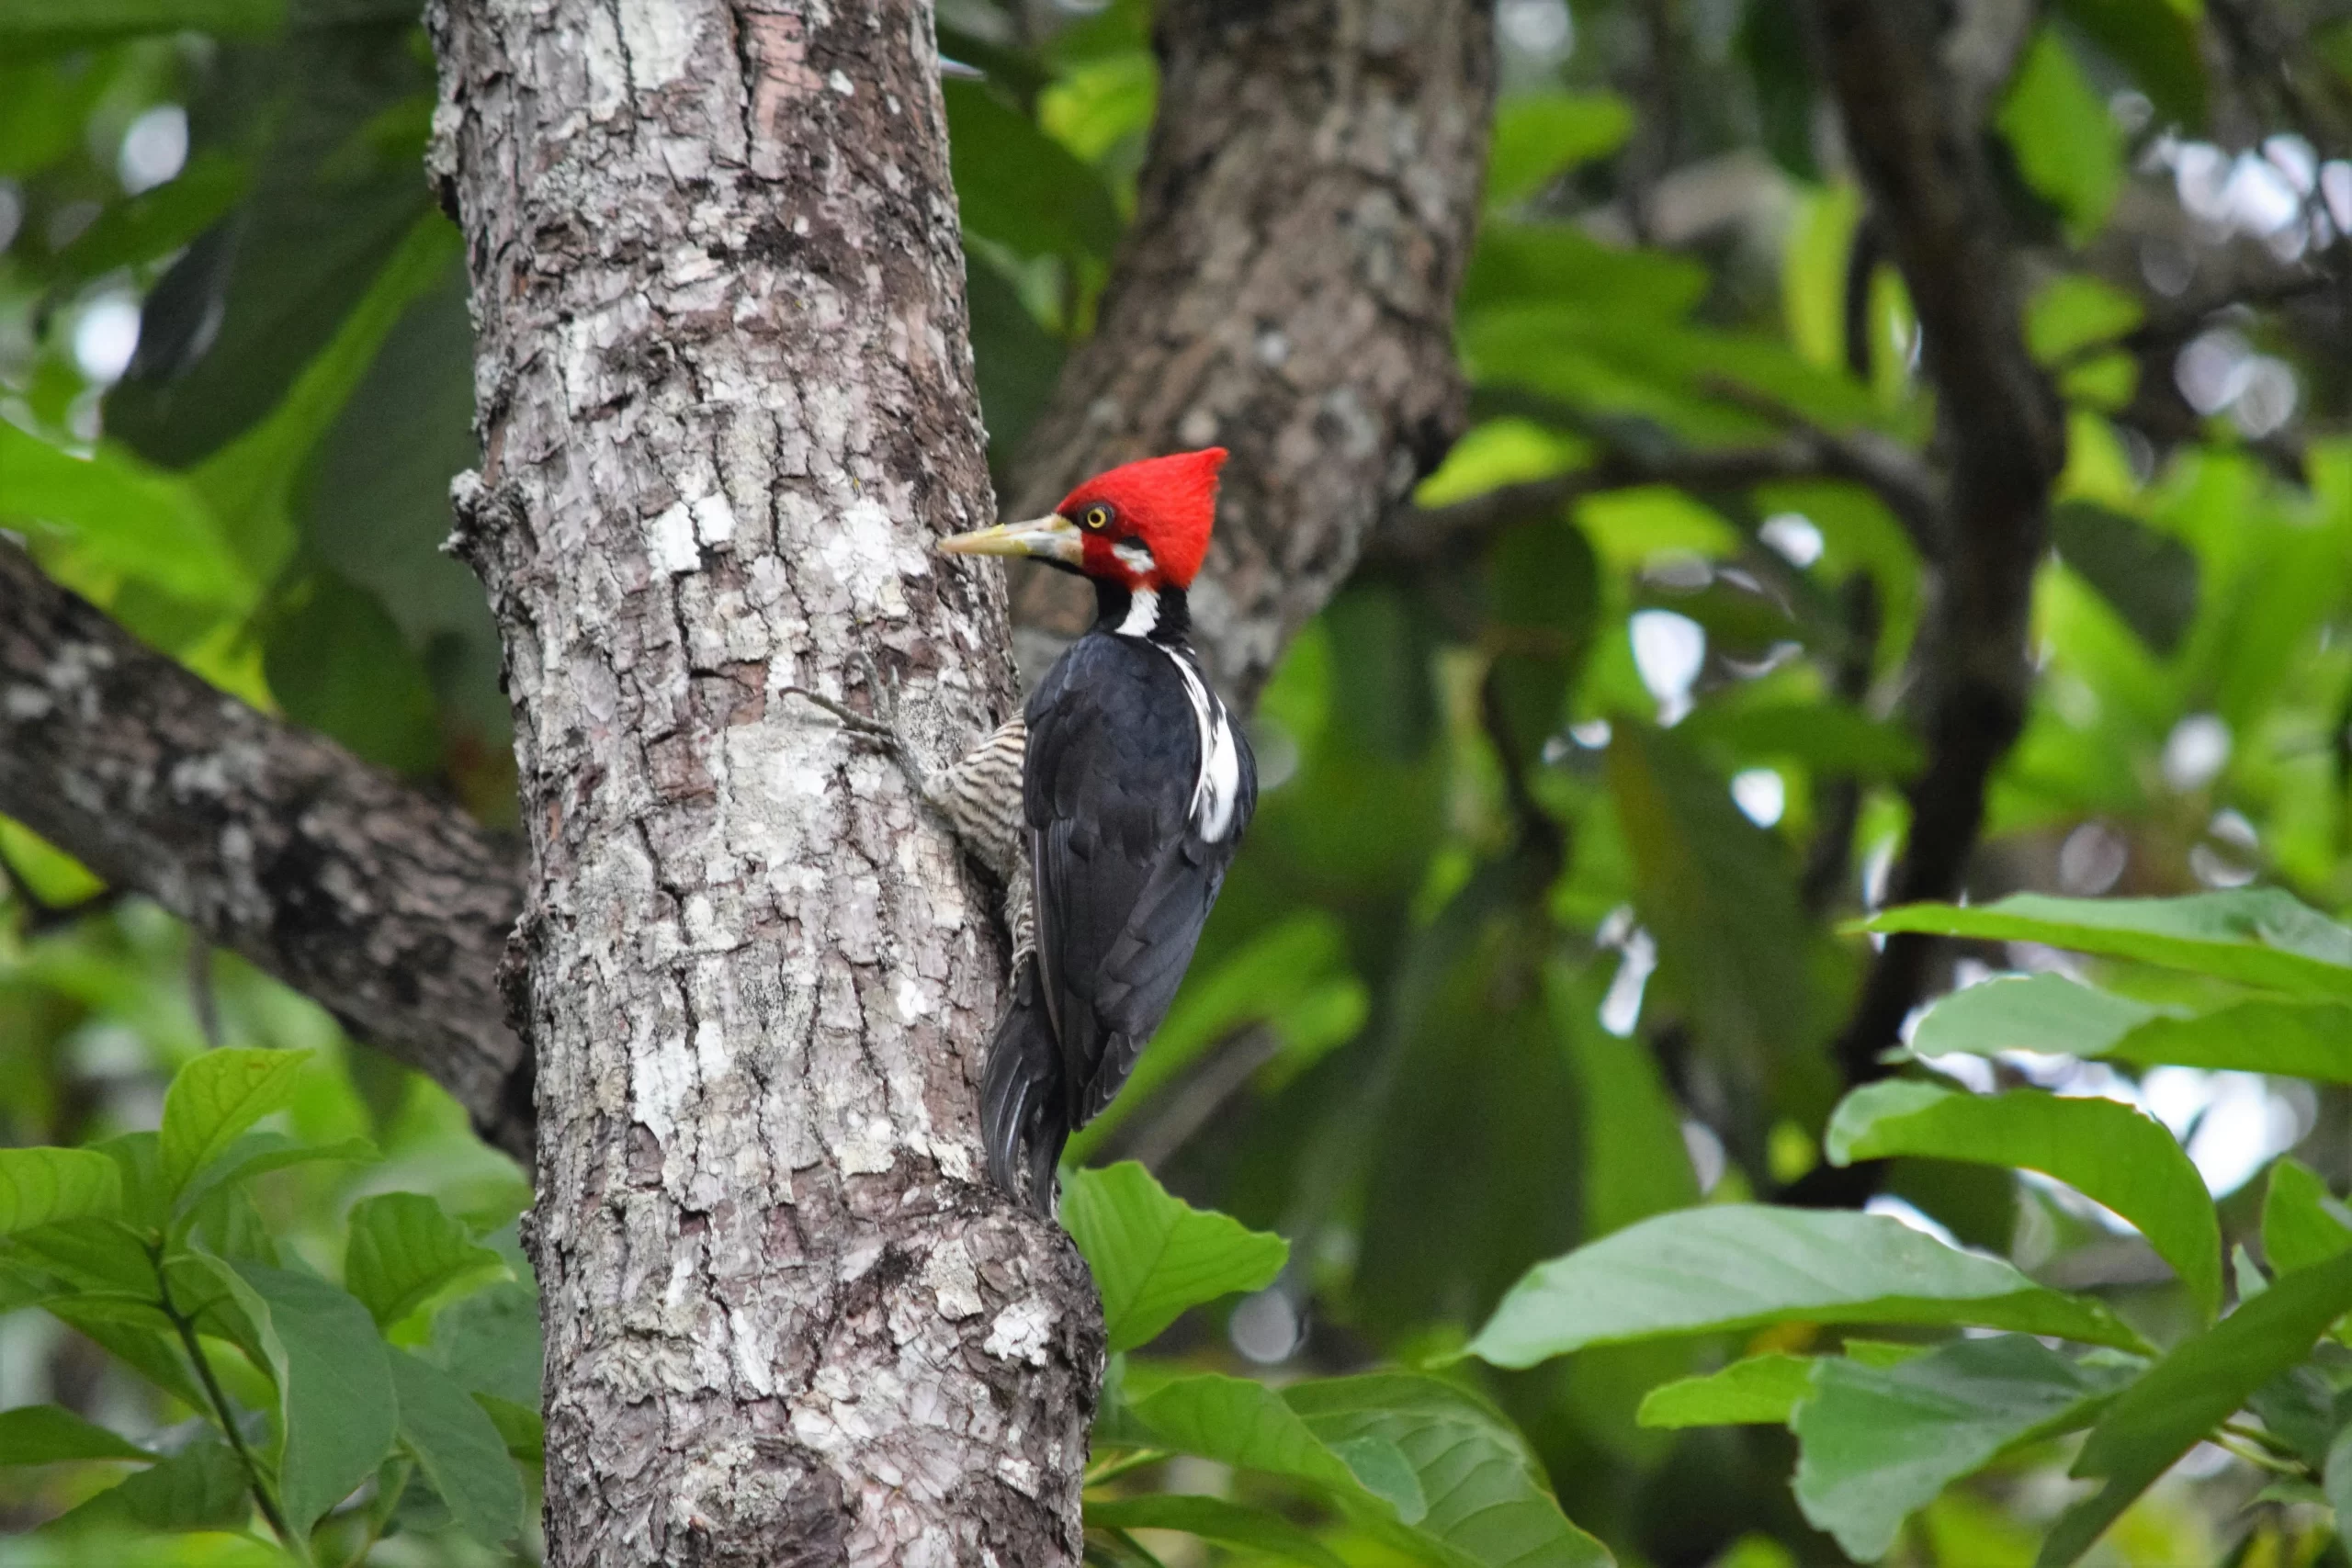 A Pale-billed Woodpecker scales up a tree. Some ask, "Do woodpeckers kill trees?".